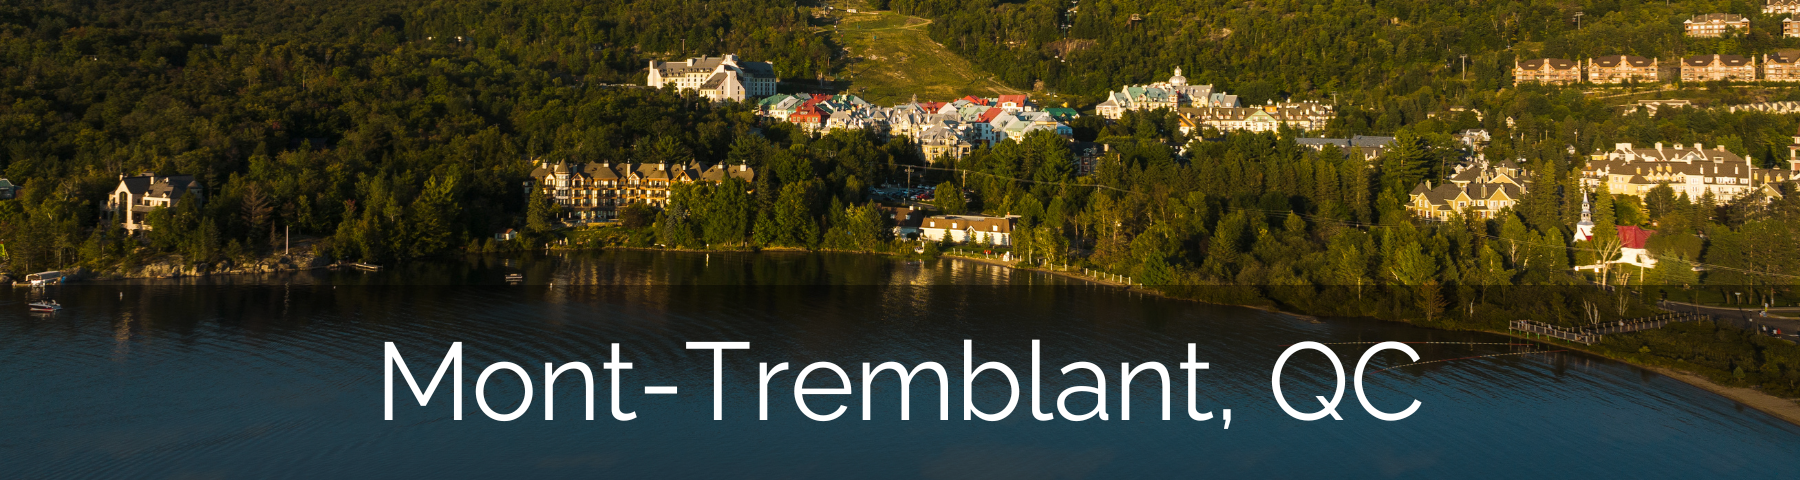 Investment Opportunities Mont Tremblant Quebec Short Term Accommodations Porperties Vacation Rental Management